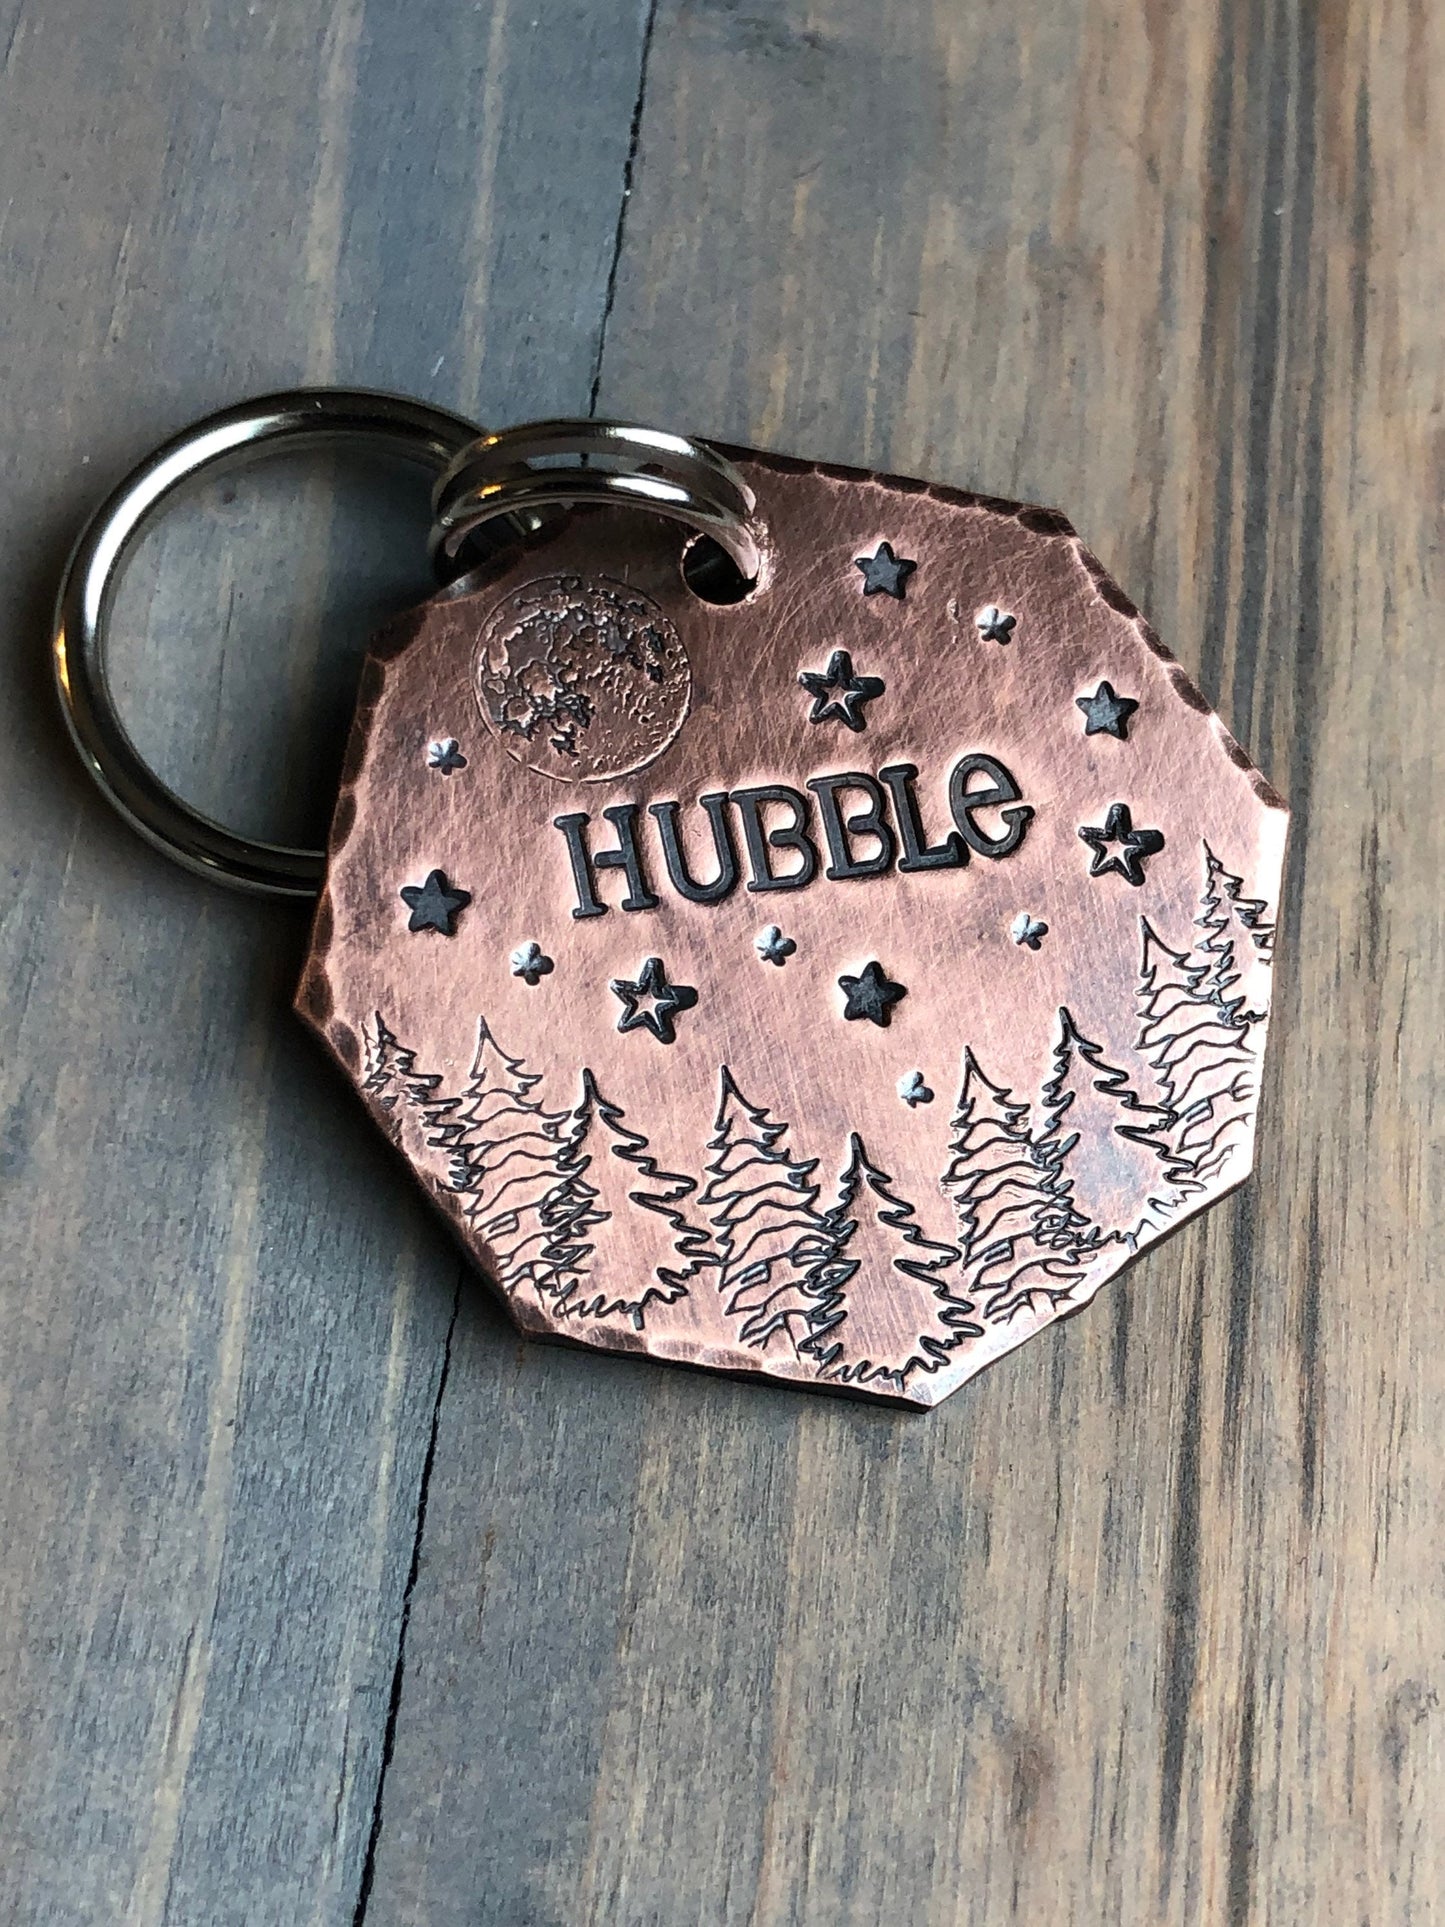 Name Tag for Dog, Hand Stamped Pet ID Tag, Dog ID Tag with Full Moon and Trees, Personalized Dog Tag for Dog, Hubble, Celestial Pet Tag Star